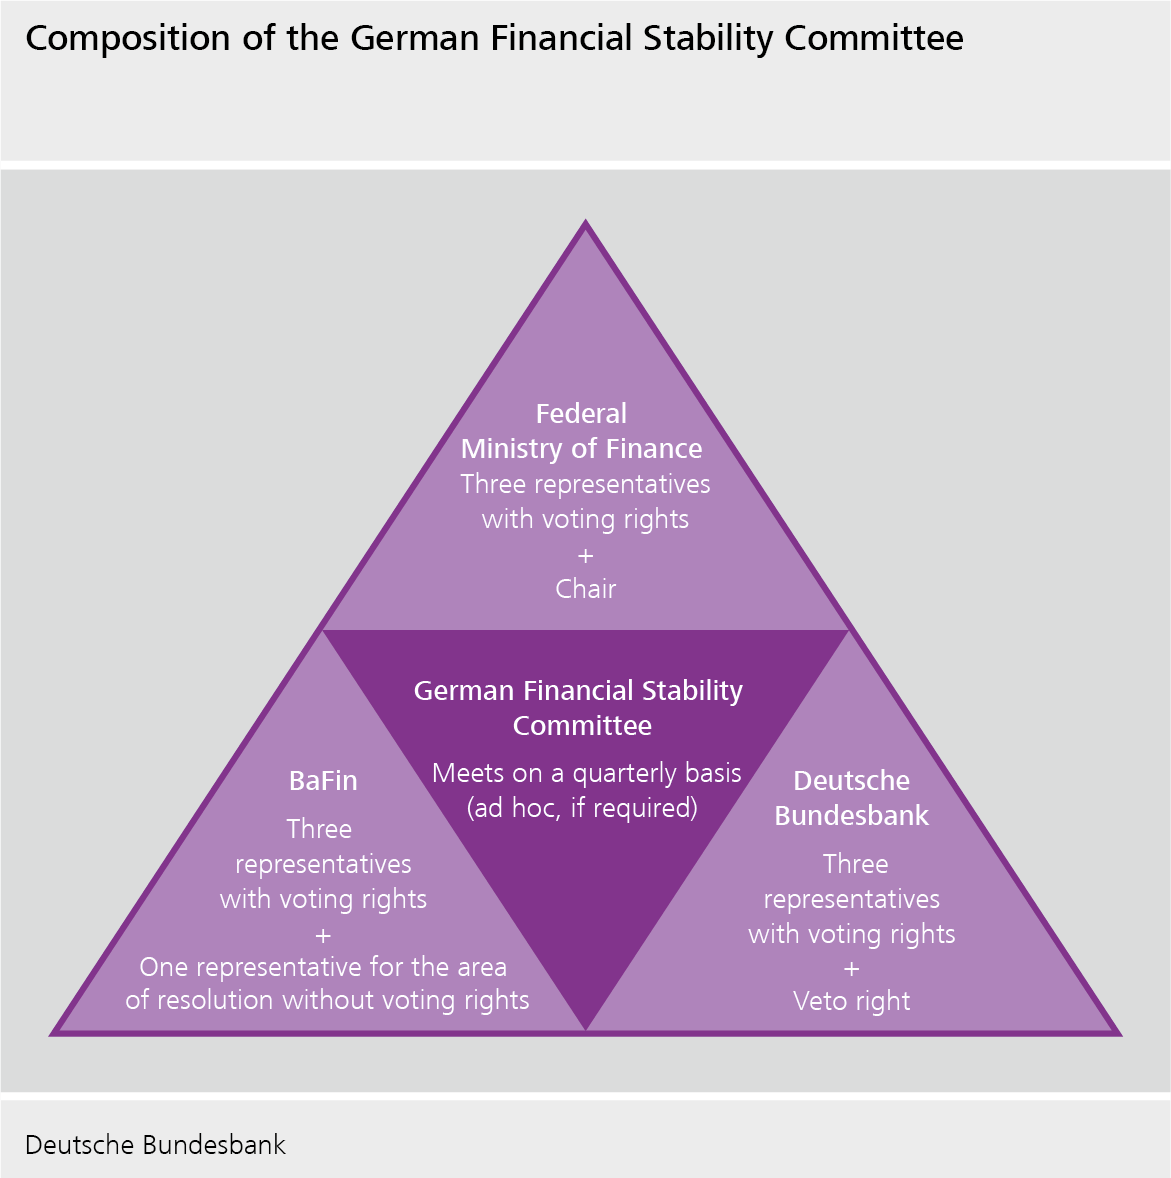 Composition of the German Financial Stability Committee